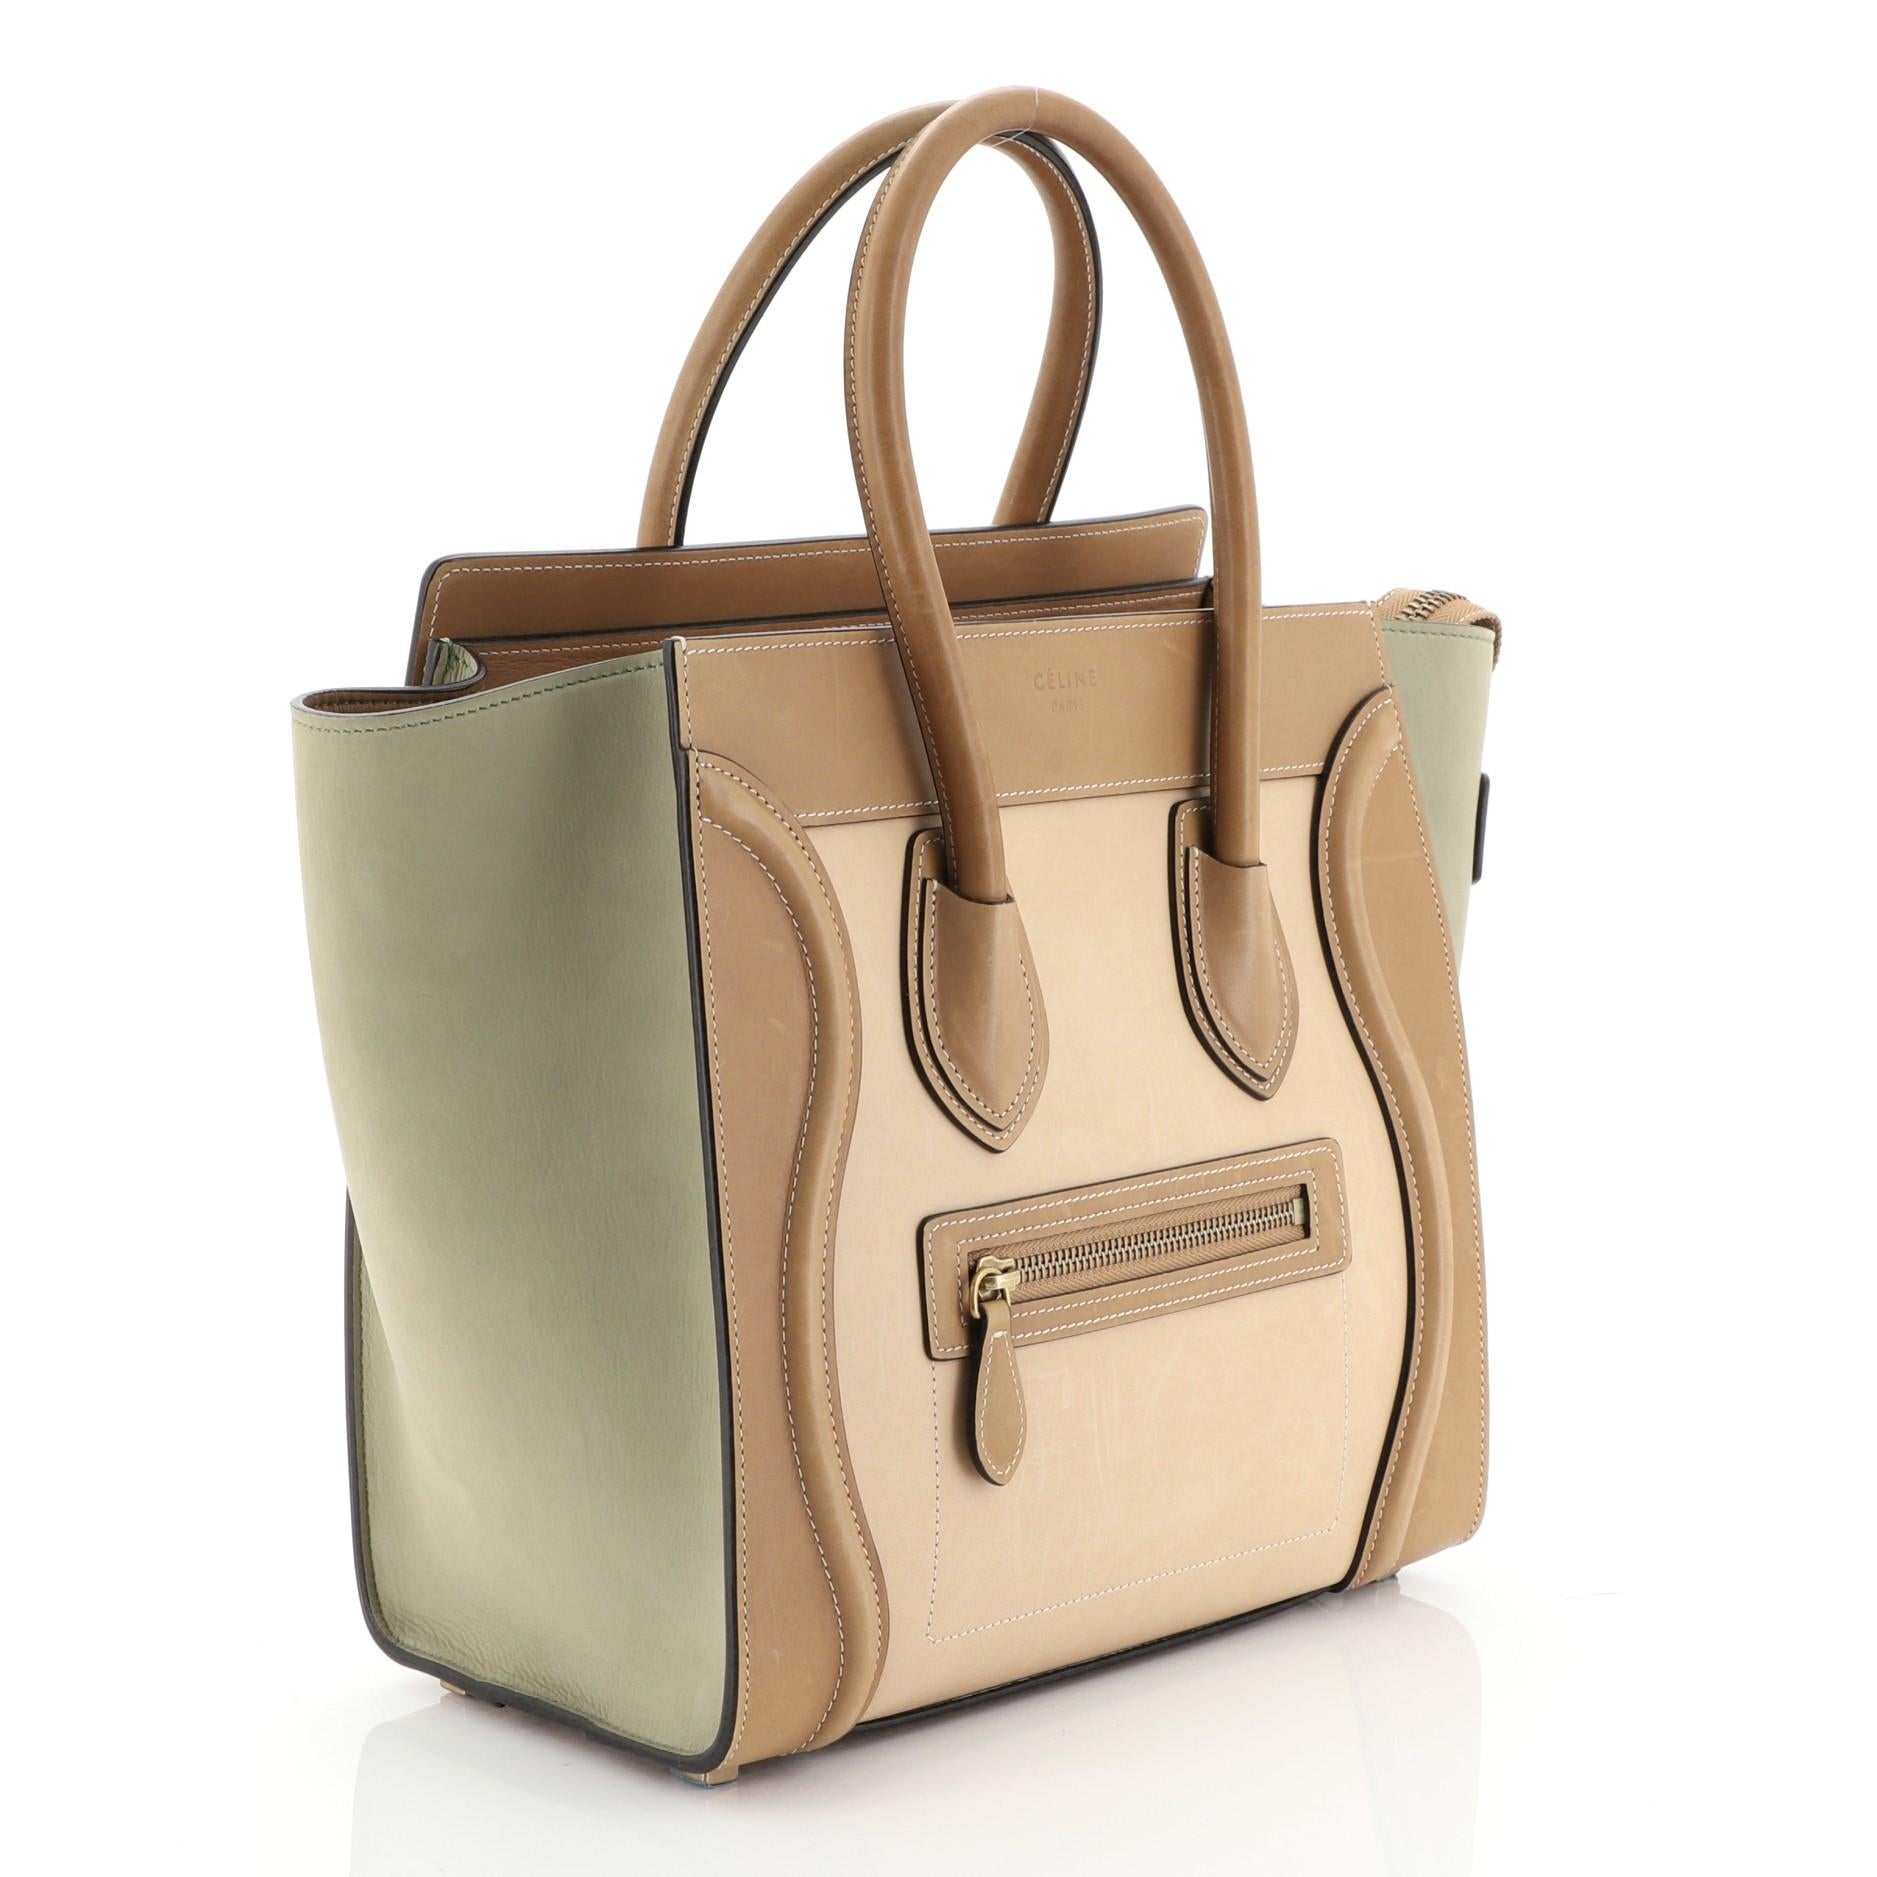 This Celine Tricolor Luggage Handbag Leather Micro, crafted in multicolor leather, features dual rolled leather handles, front zip pocket, and gold-tone hardware. Its zip closure opens to a neutral leather interior with zip and slip pockets.